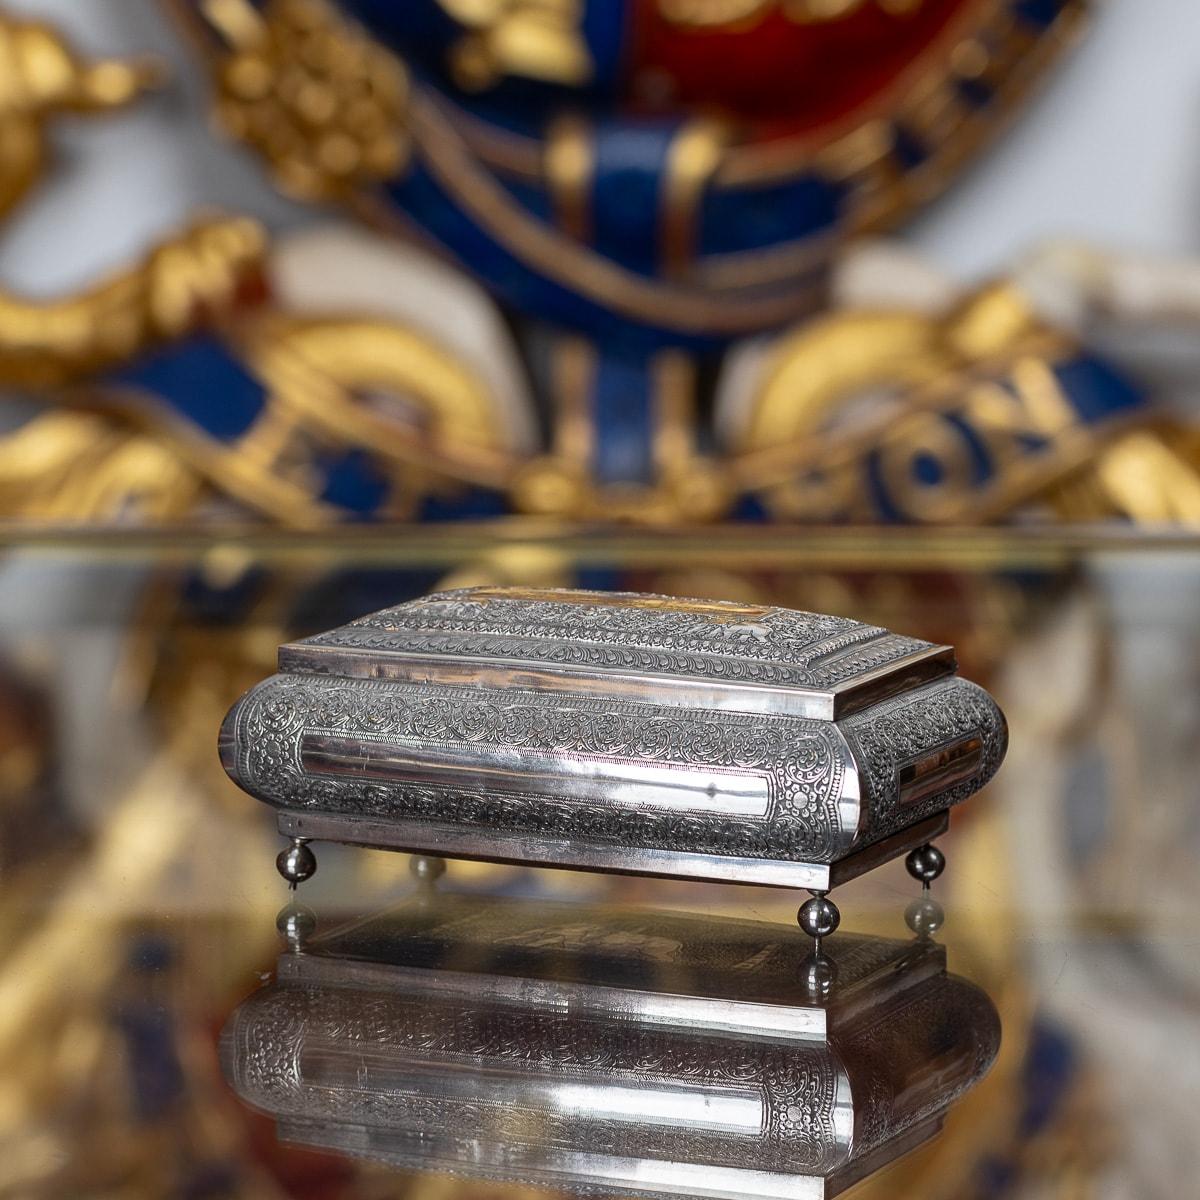 Mid 20th Century Sri Lankan solid silver box, of rectangular form, beautifully engraved and chased with a repousse design and featuring elephants amongst foliage. The lid has an engraved plaque ' To W D MacBey Esor, presented by The Staff of the